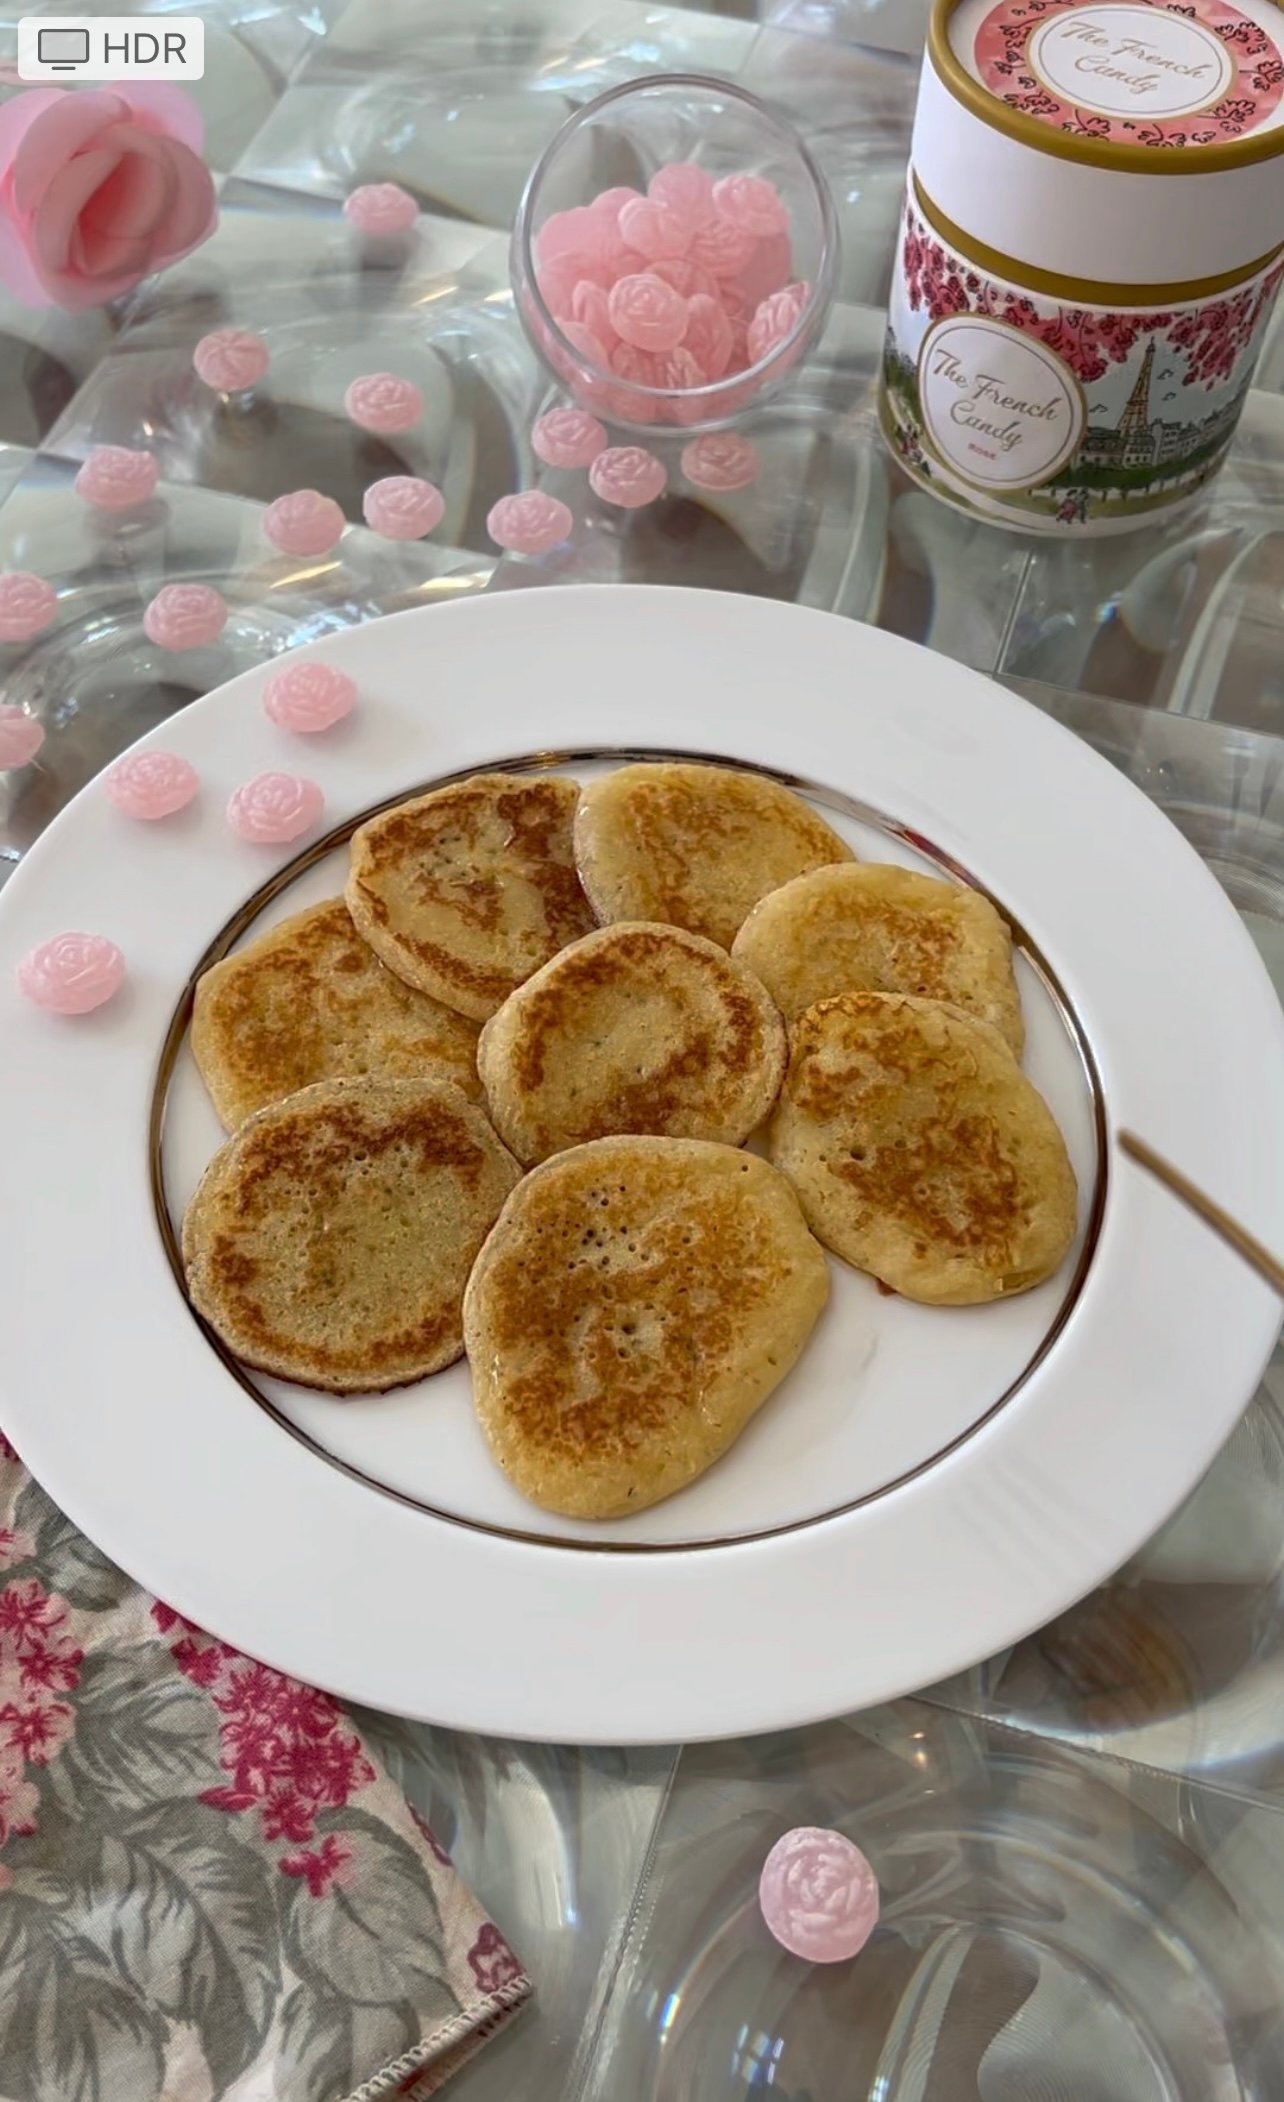 French Pancakes like small crepe with Rose flavor